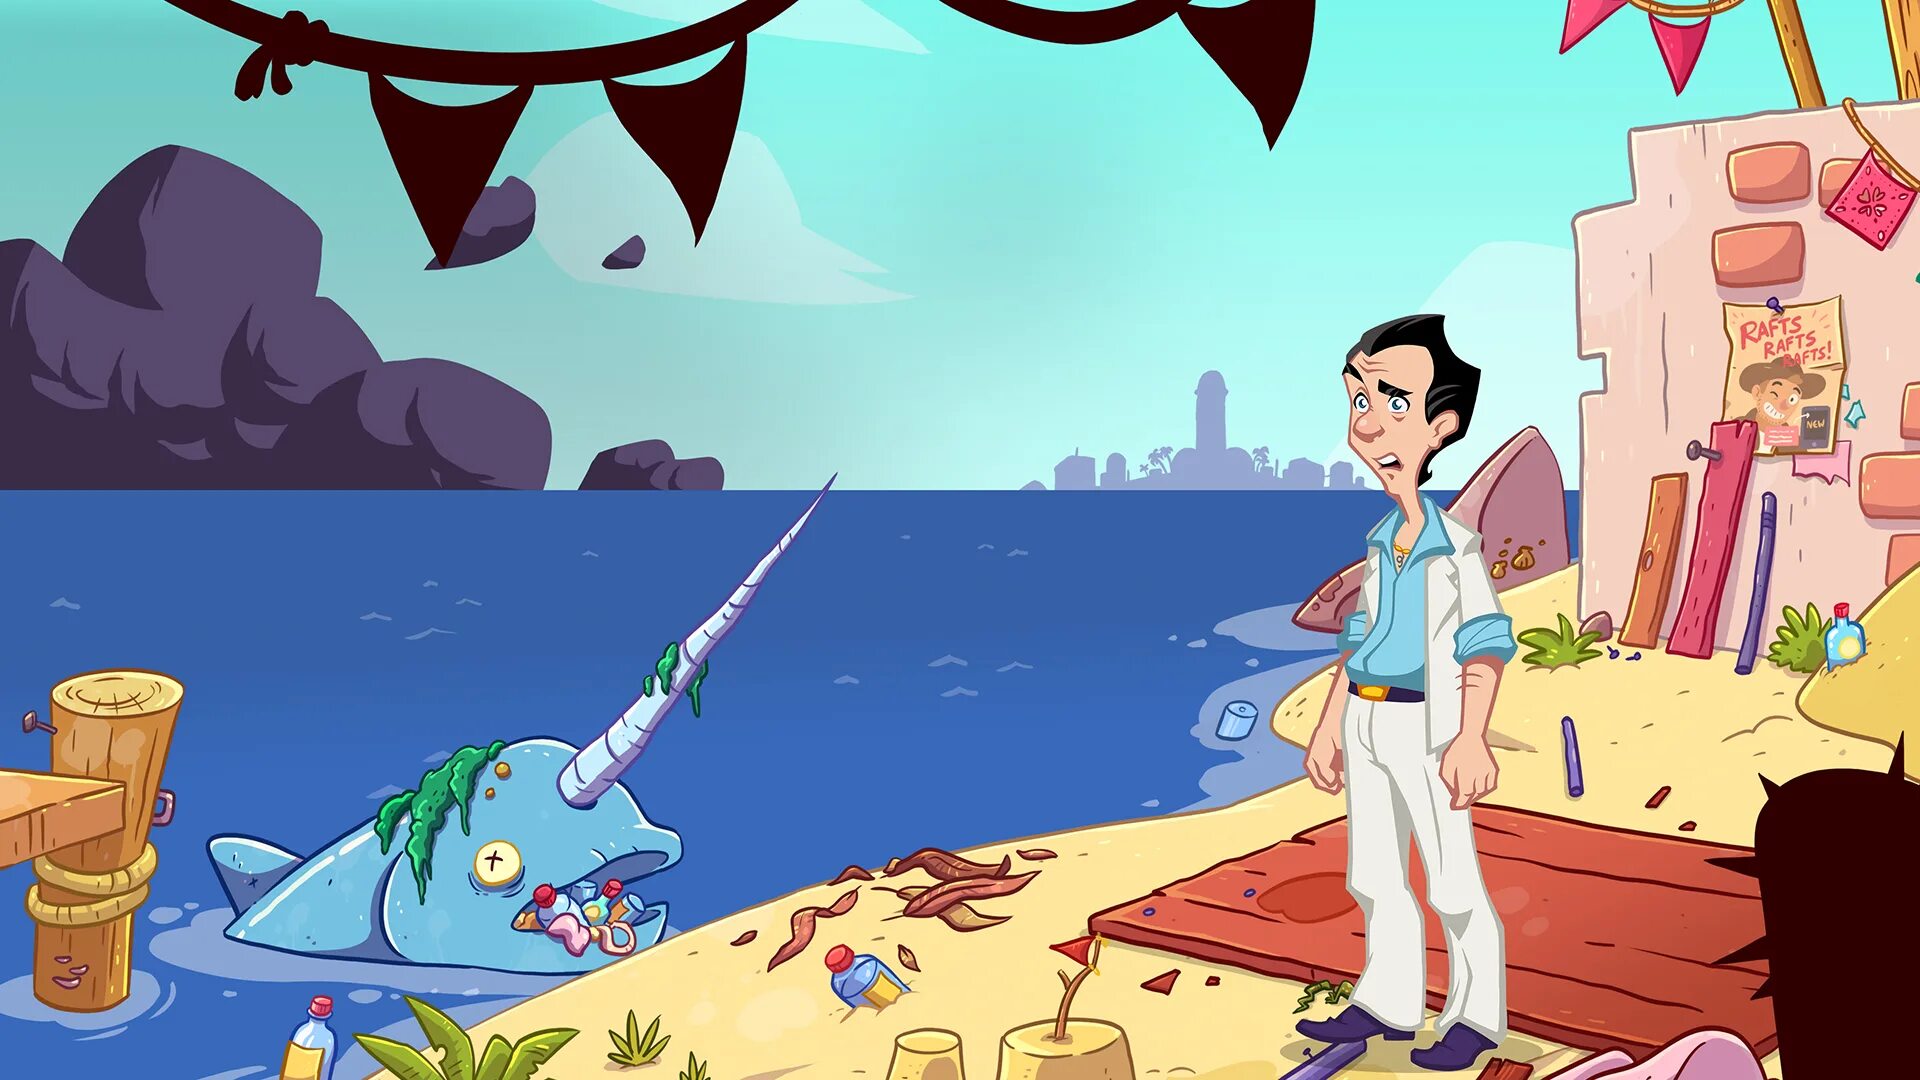 Leisure Suit Larry. Ларри Лаффер 2020. Leisure Suit Larry - wet Dreams Dry twice. Larry wet Dreams Dry twice.